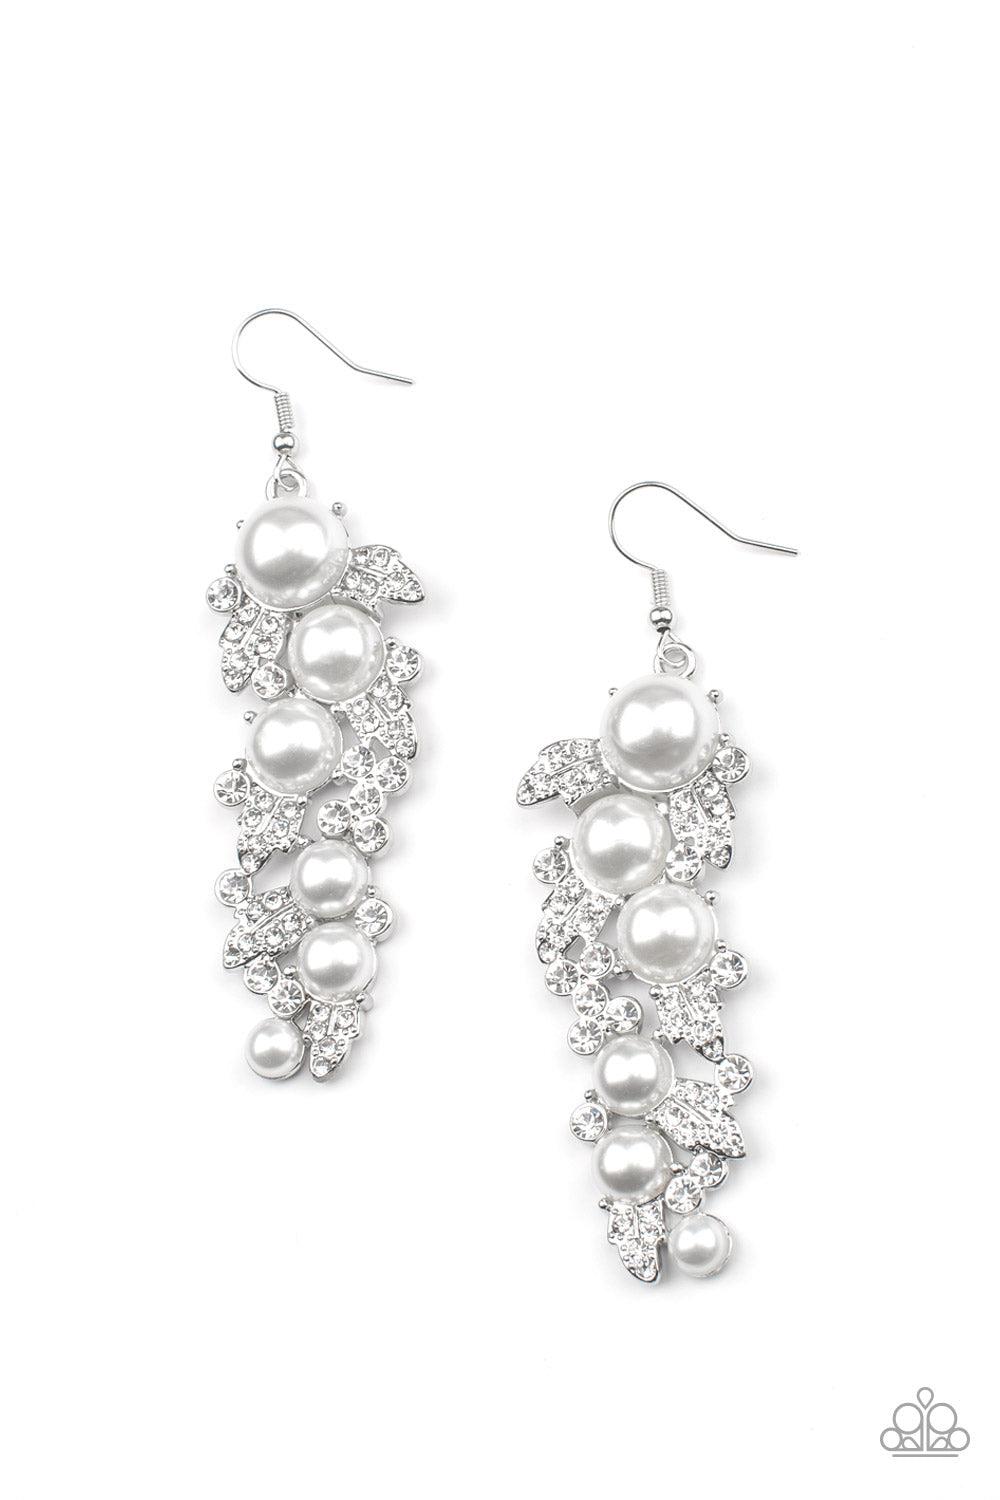 The Party Has Arrived White Pearl &amp; Rhinestone Earrings - Paparazzi Accessories- lightbox - CarasShop.com - $5 Jewelry by Cara Jewels